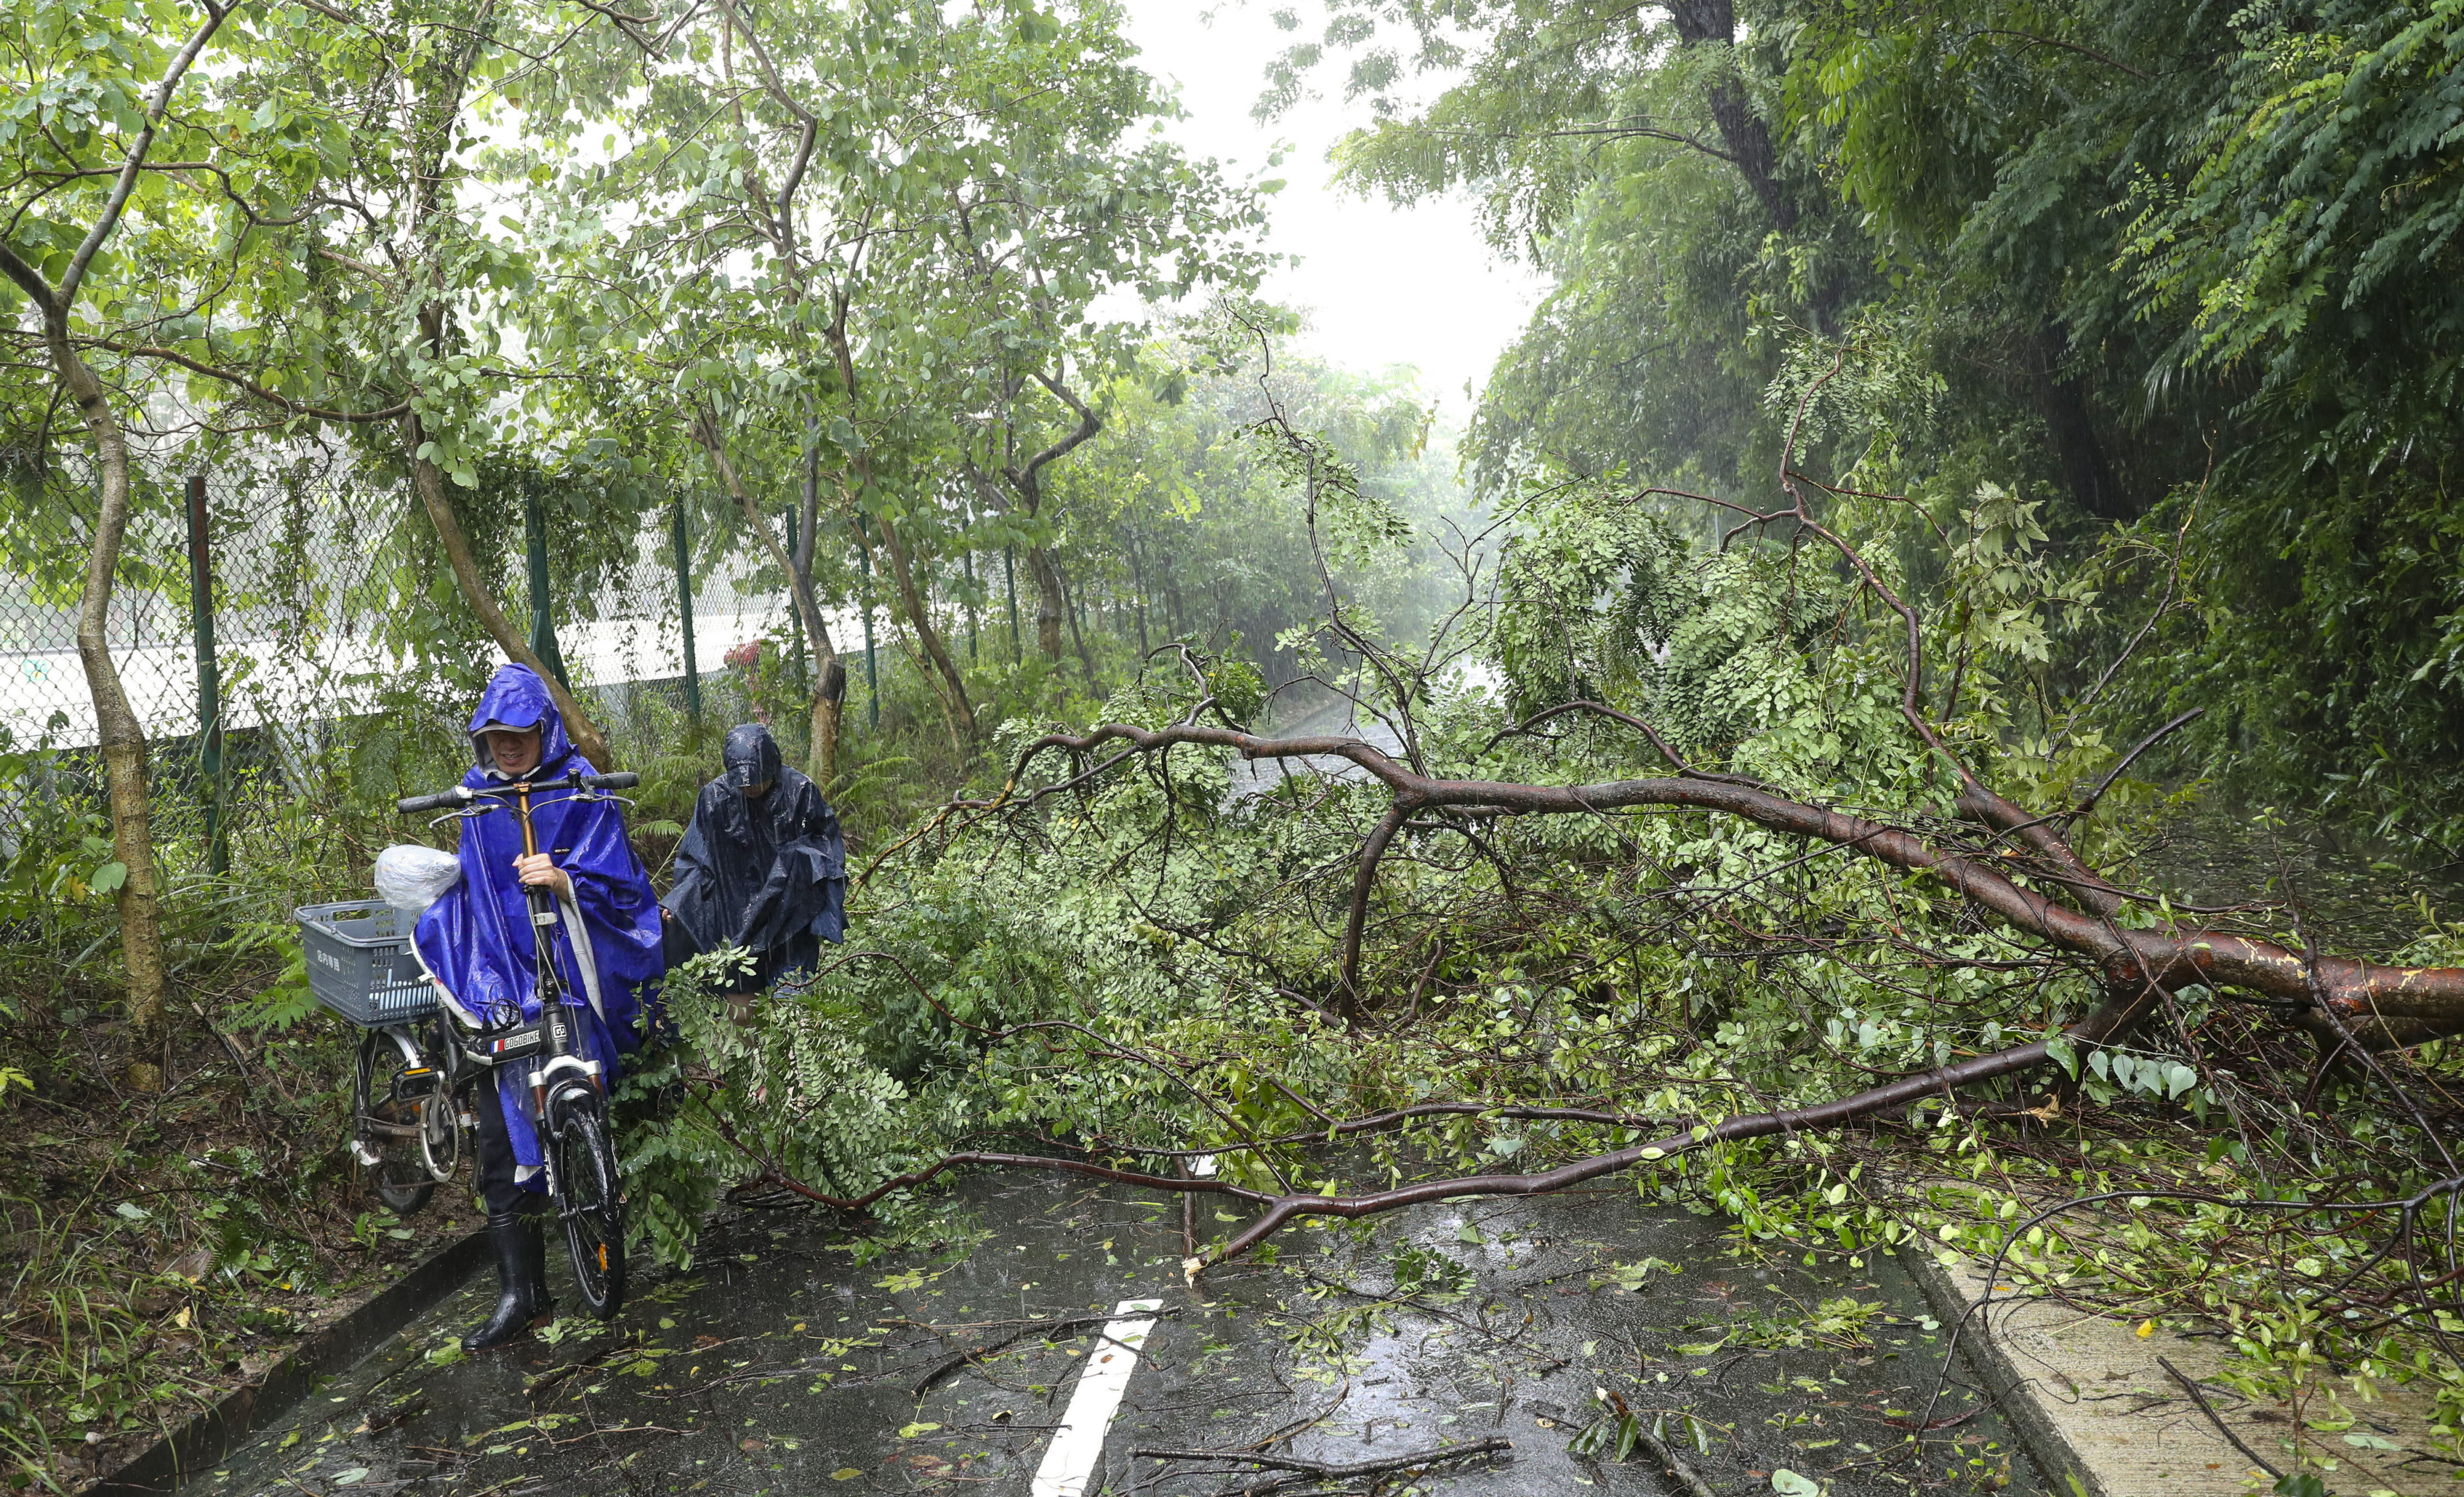 A fallen tree blocks the path of bikers in Sha Tin in the aftermath of Saola. Photo: Sam Tsang